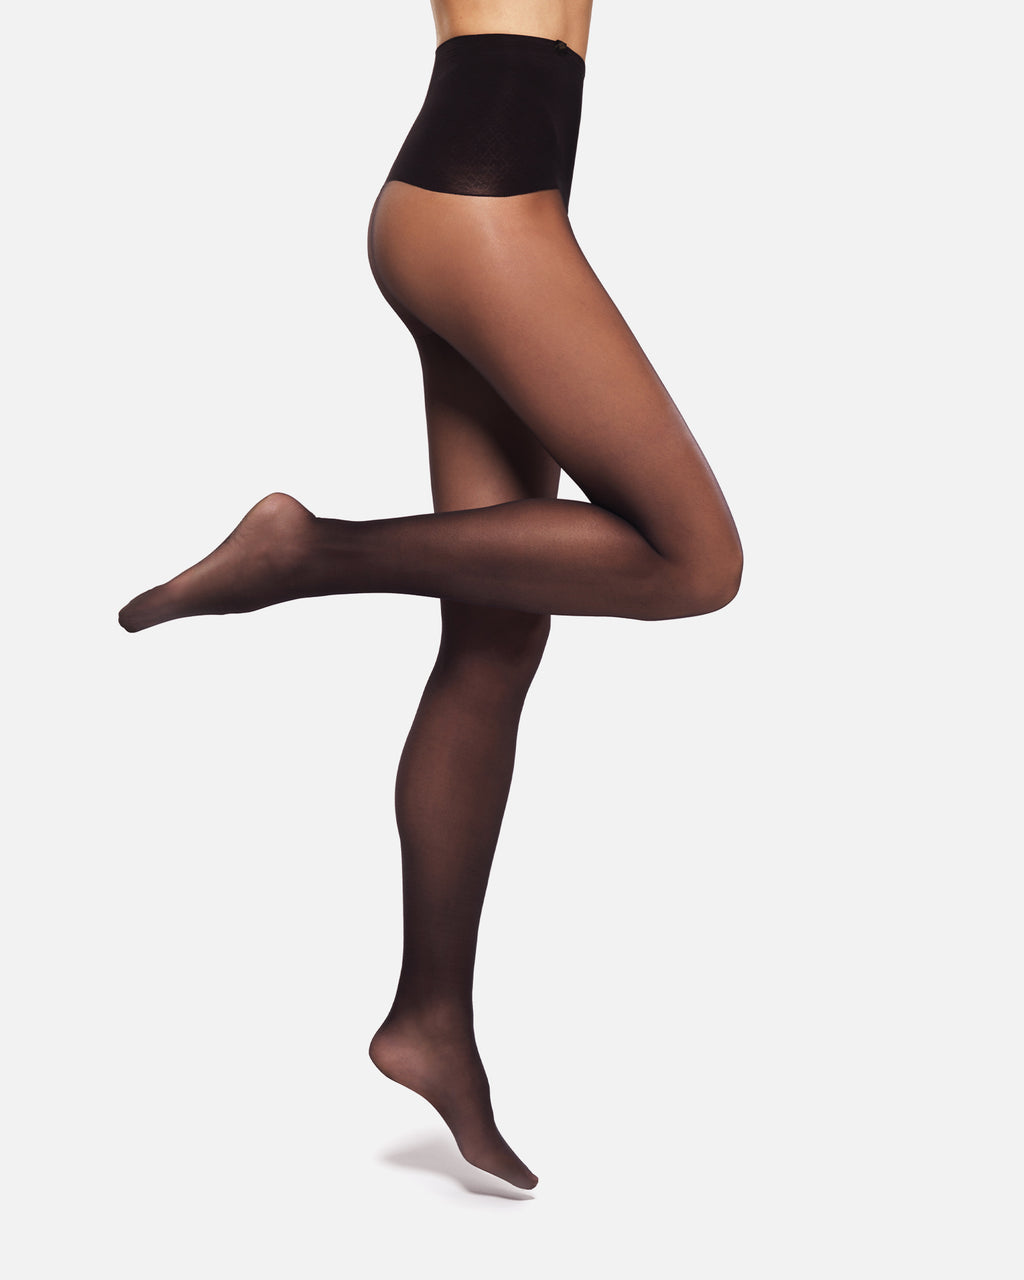 Beauty Resist 40 Opaque tights in black